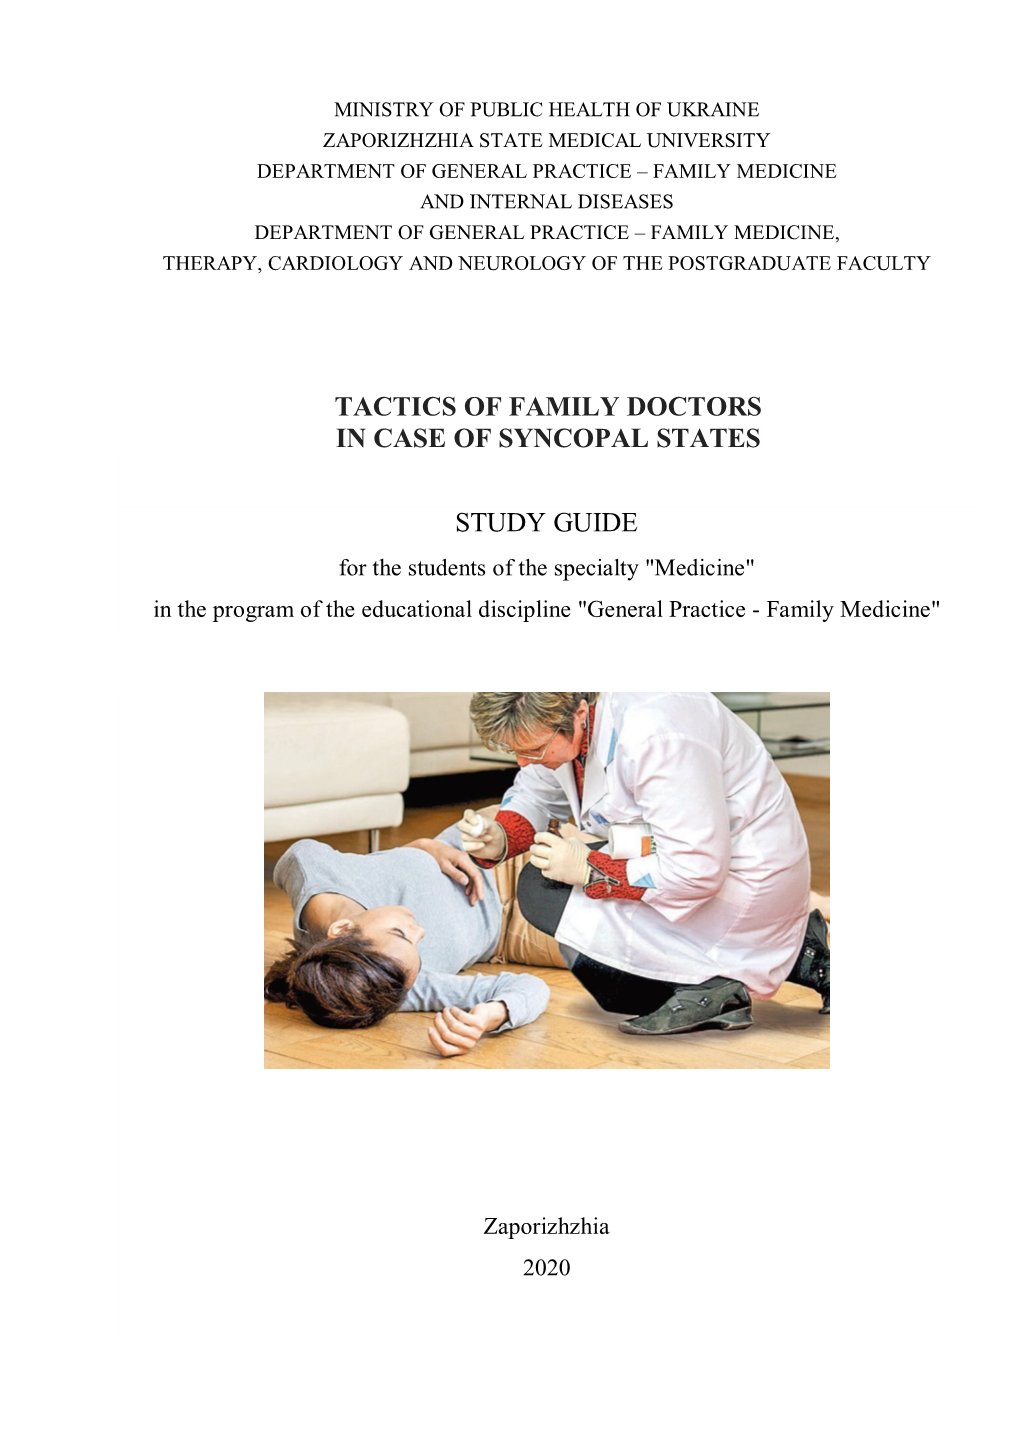 Tactics of Family Doctors in Case of Syncopal States